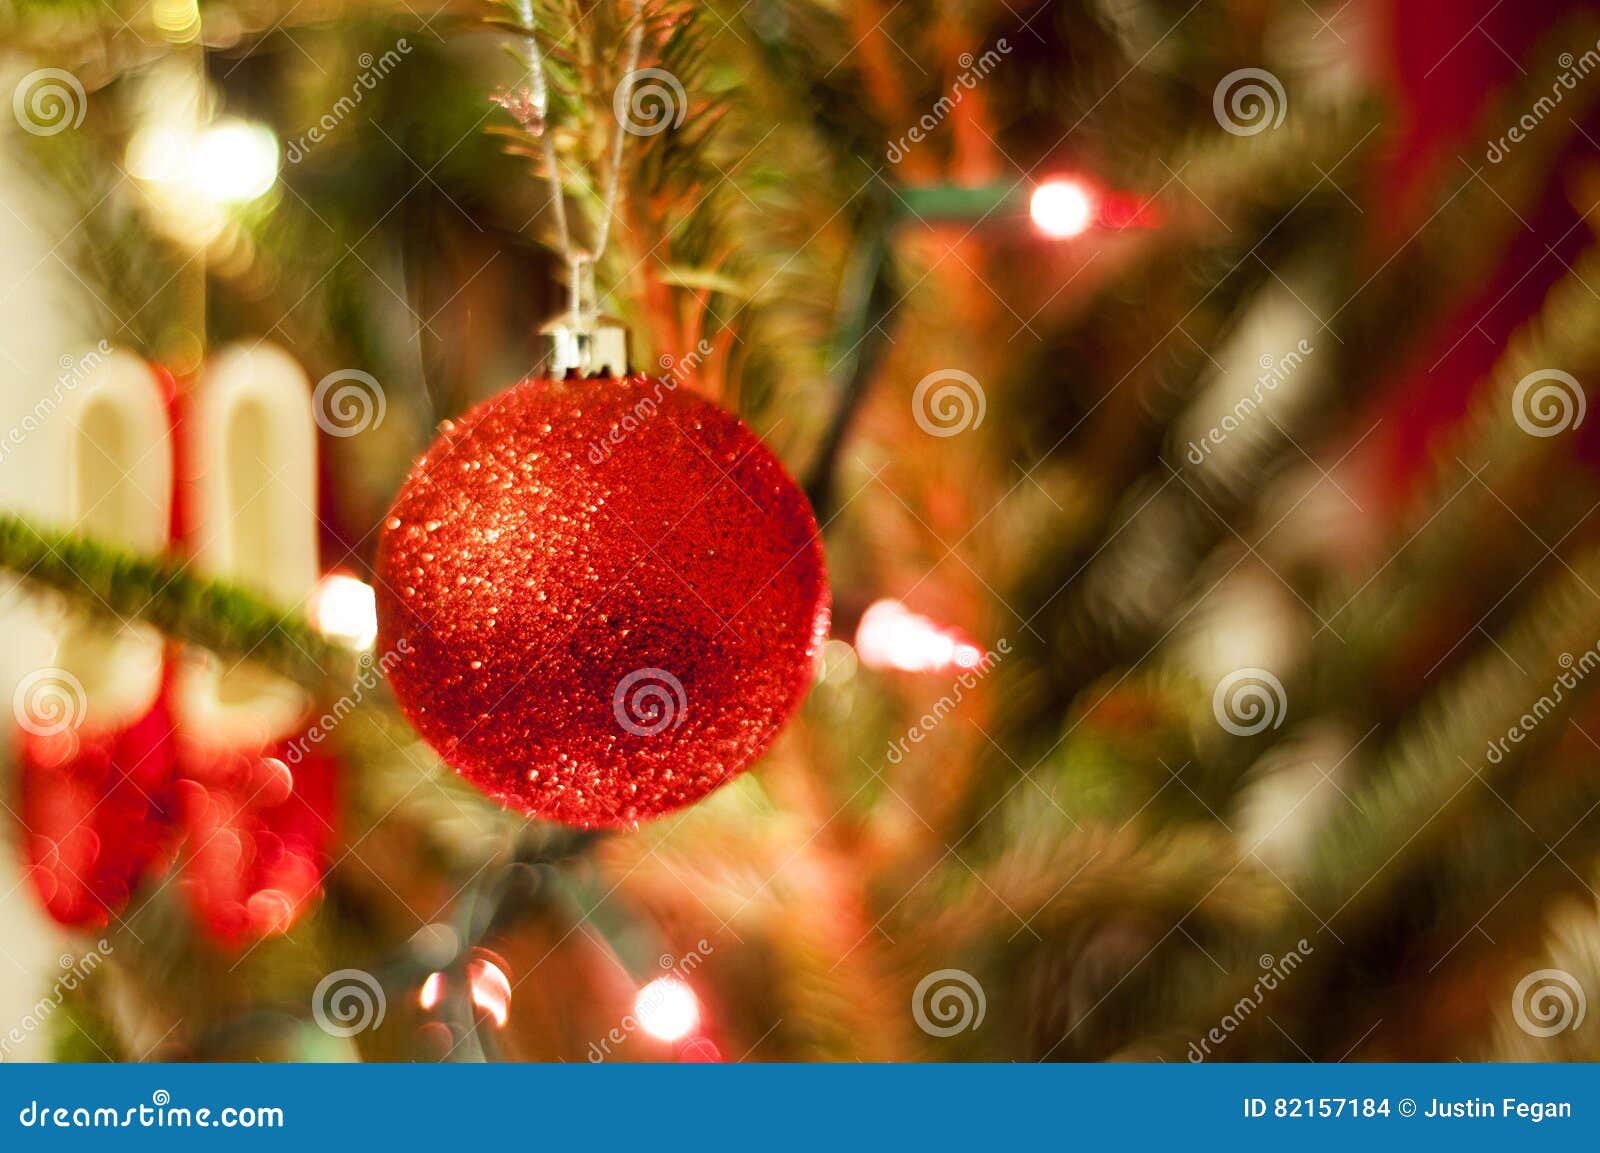 Red Christmas Ornaments with Red and White Lights Stock Photo - Image ...